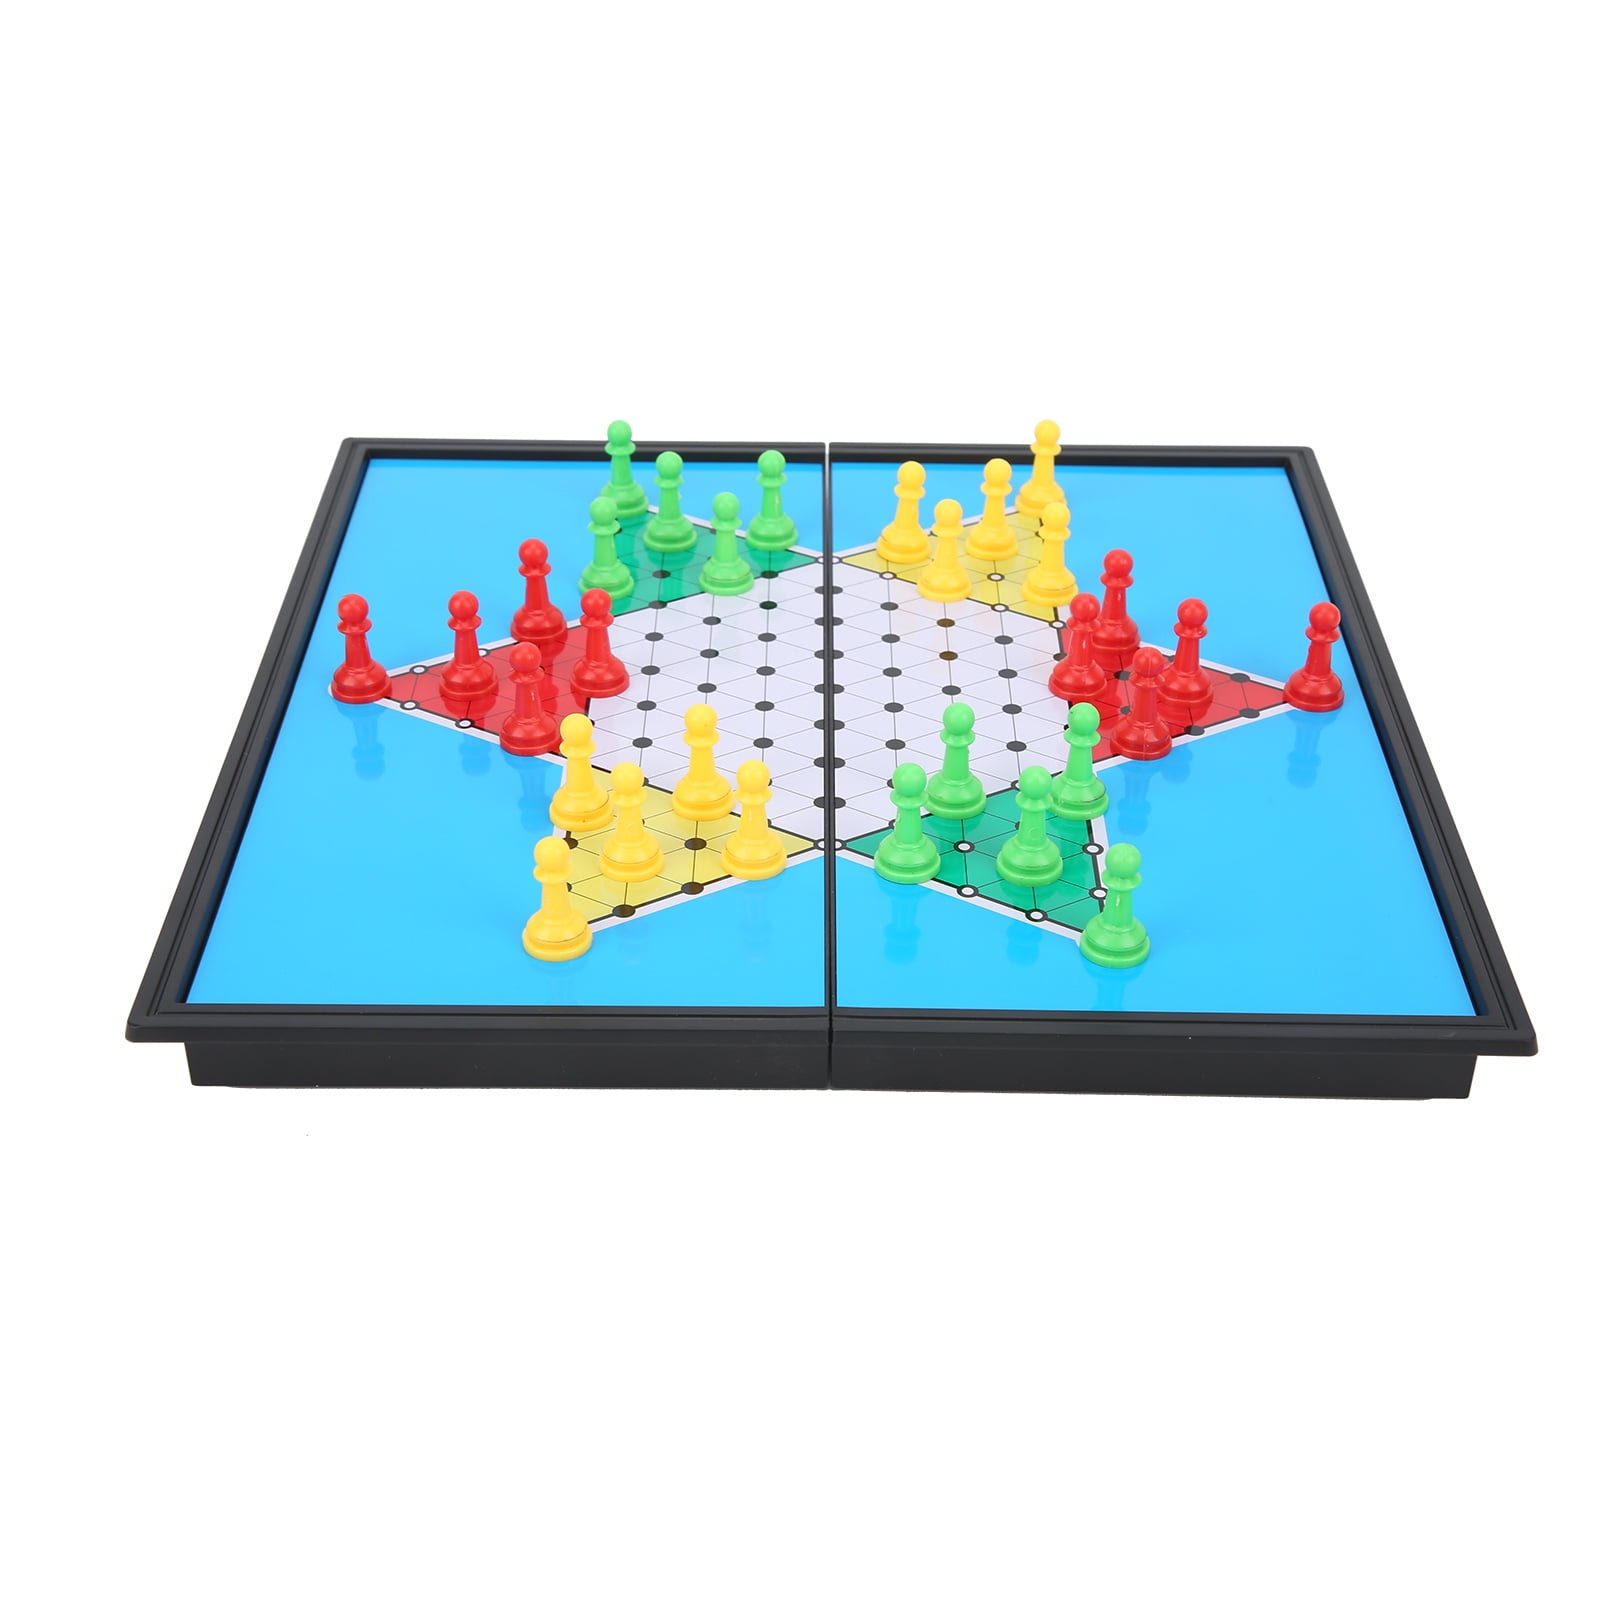 Mini Halma Game Magnetic Travel Game Travel Games Approx. 5 1/8x2 13/16in